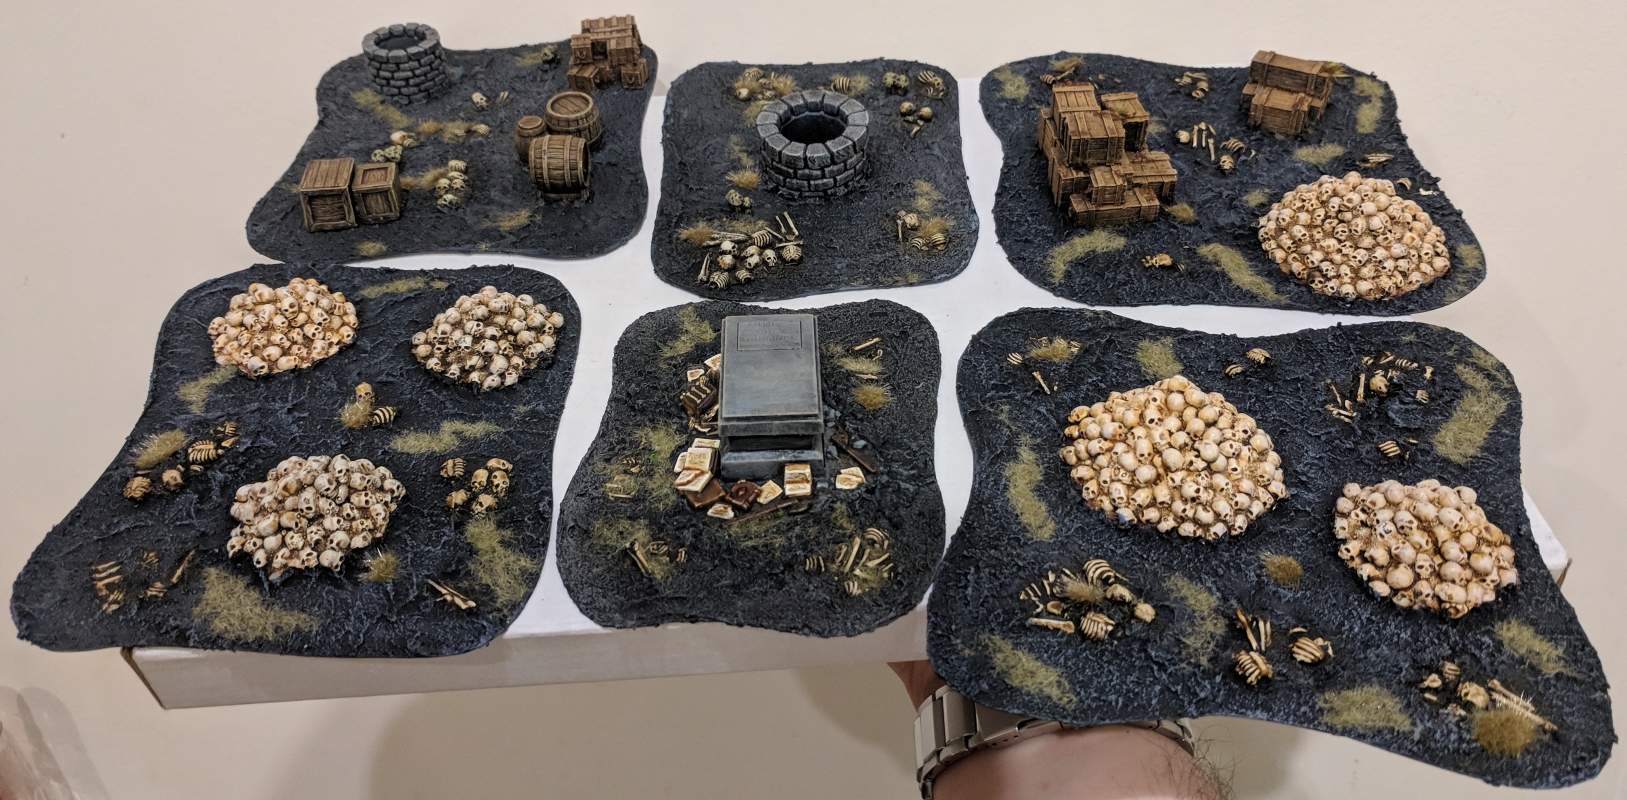 Jay's Wargaming Madness: Mines of Moria - Middle Earth SBG Scenarios